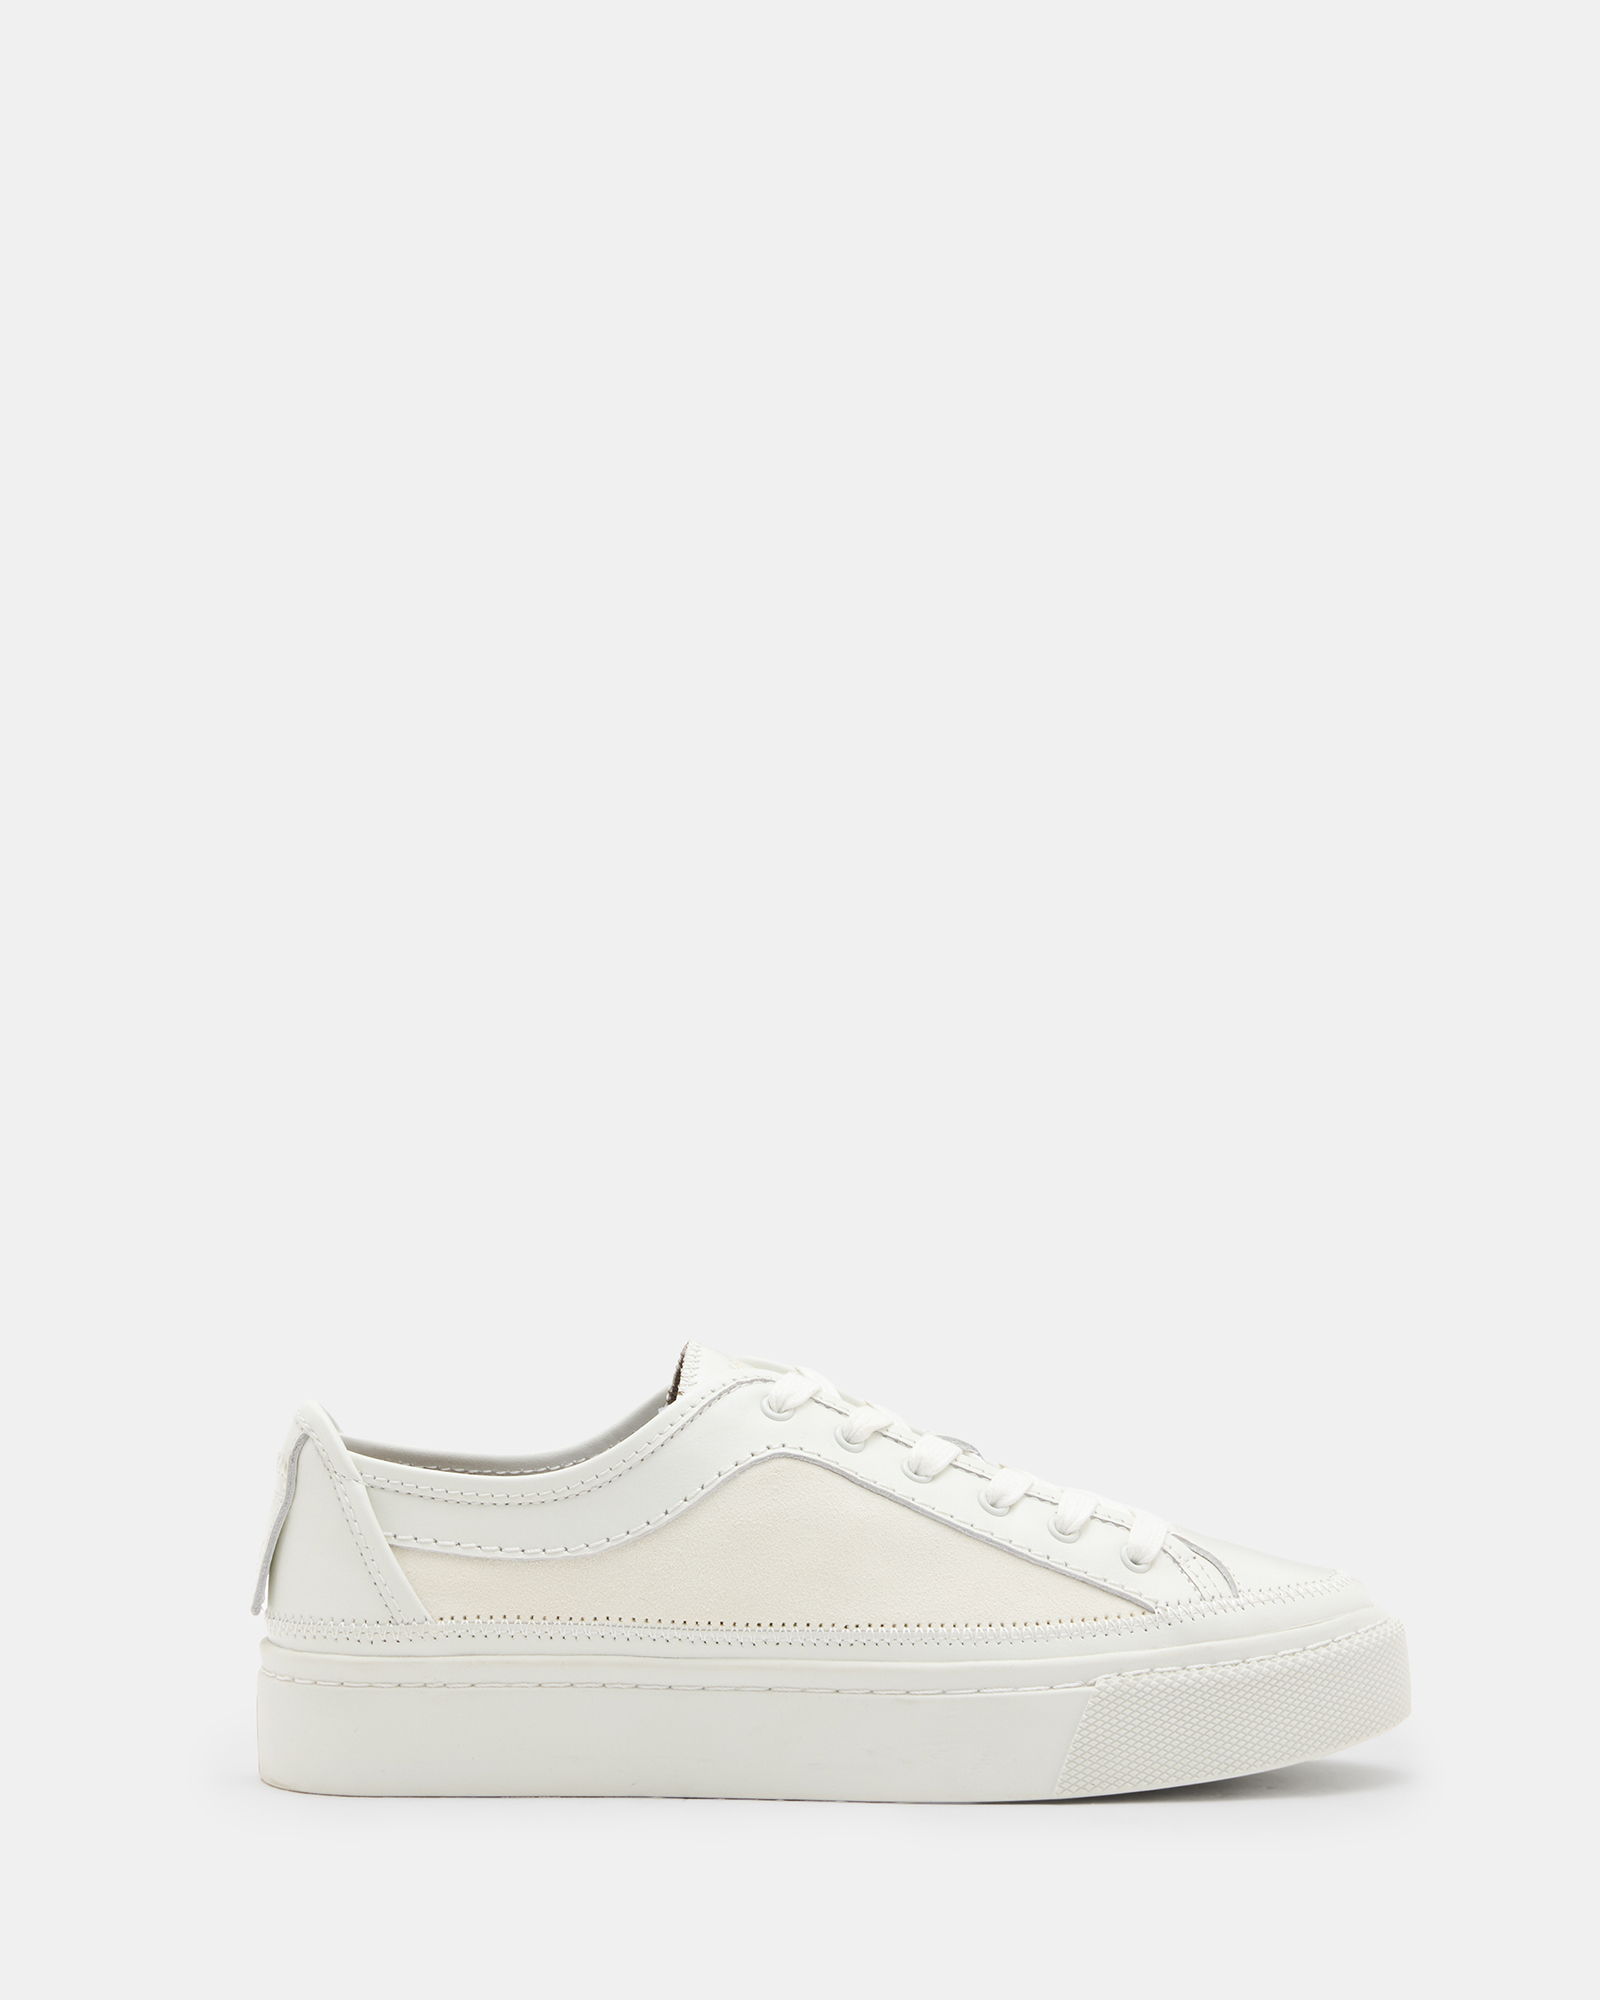 AllSaints Milla Suede Lace Up Trainers,, White